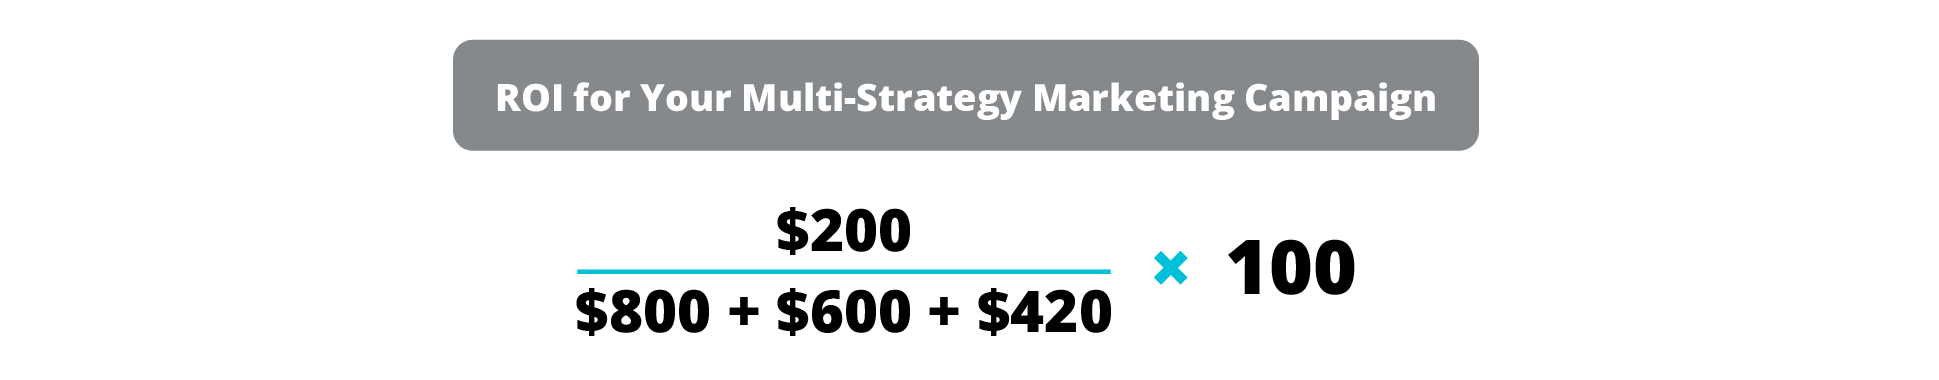 Image ROI for your multi-strategy marketing campaign: ($200) / ($800 + $600 + $420) x 100